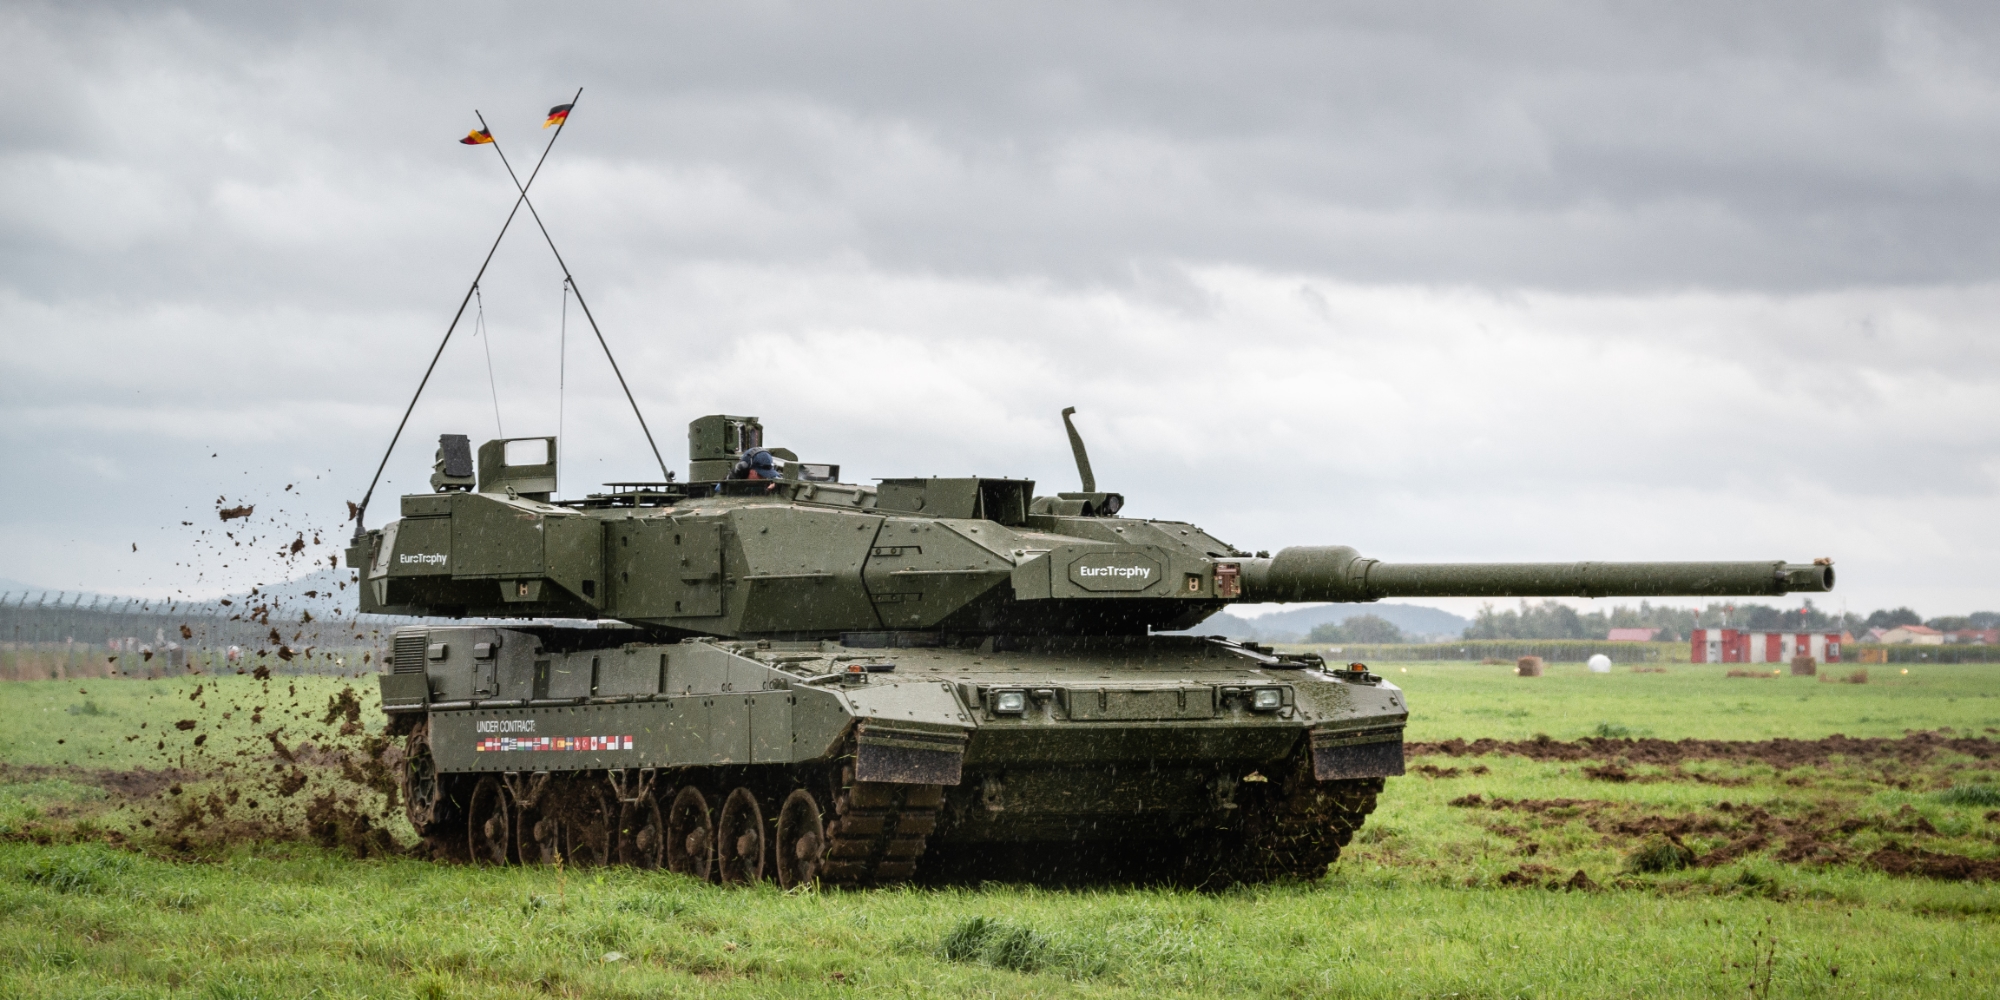 To replace the Ariete: Italy wants to buy 250 modern Leopard 2A7 tanks